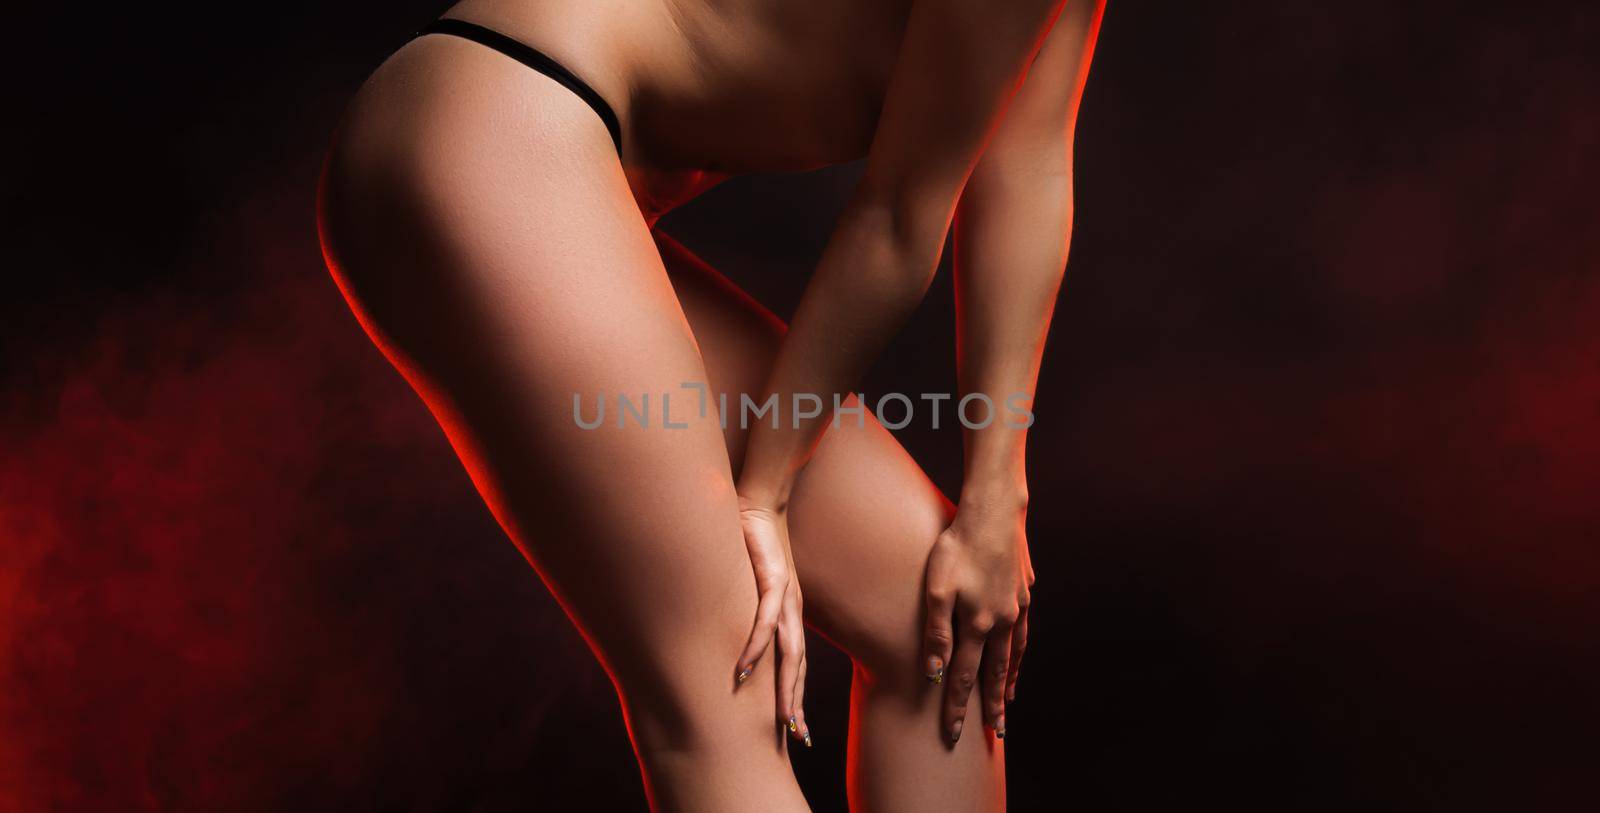 Young semi-nude woman in lace black panties posing in the studio on a dark background